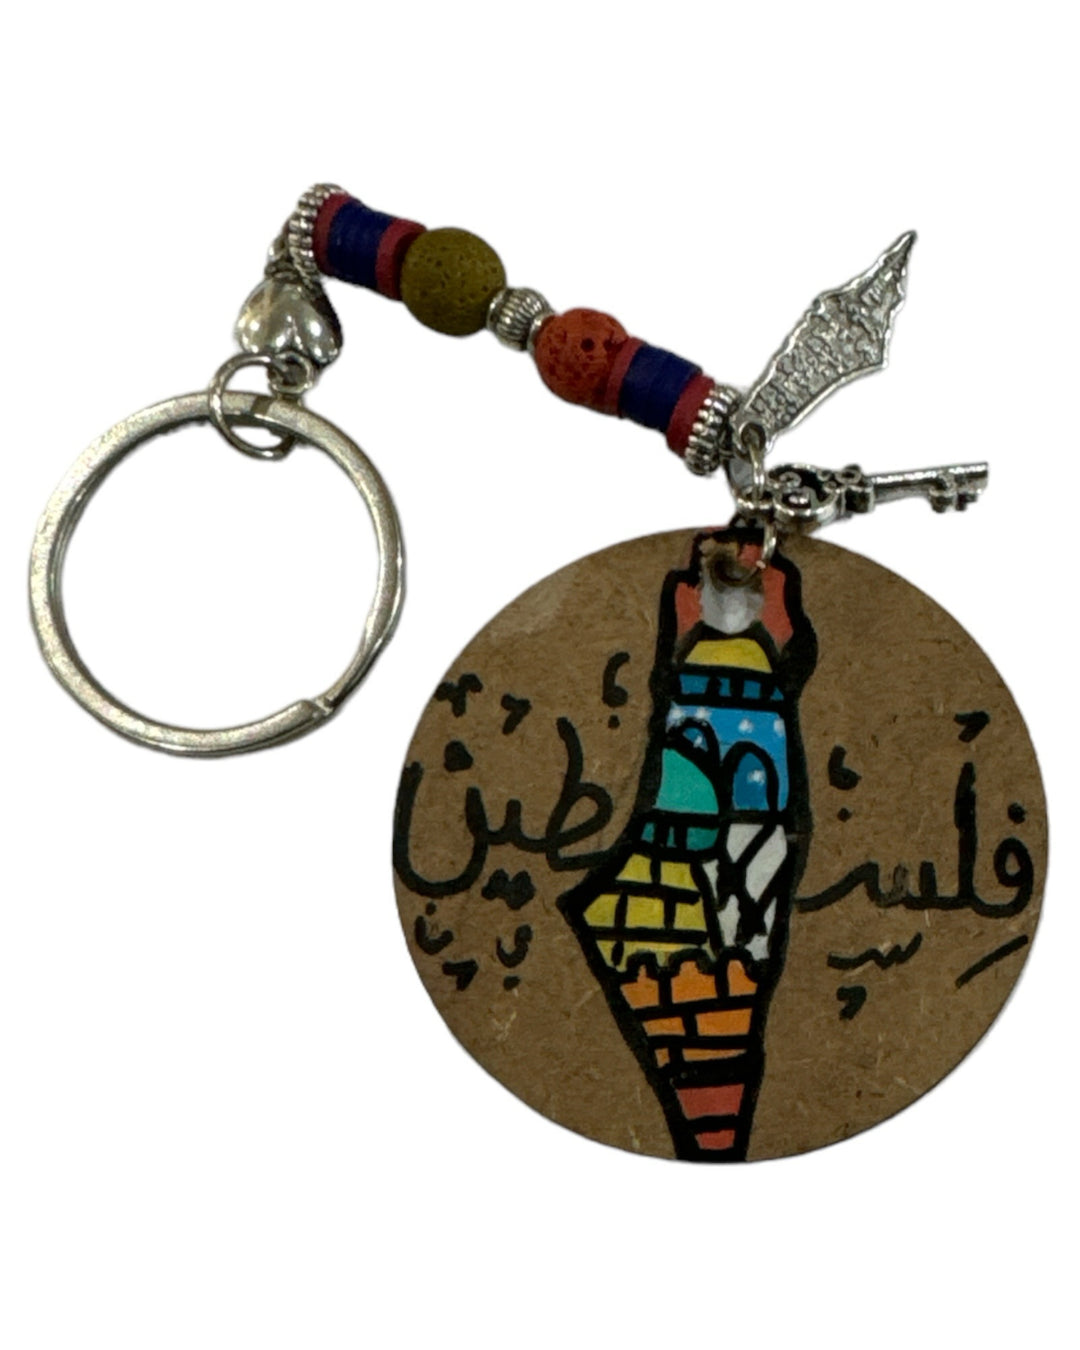 Heart of Palestine - Handcrafted Olive Wood Keychain